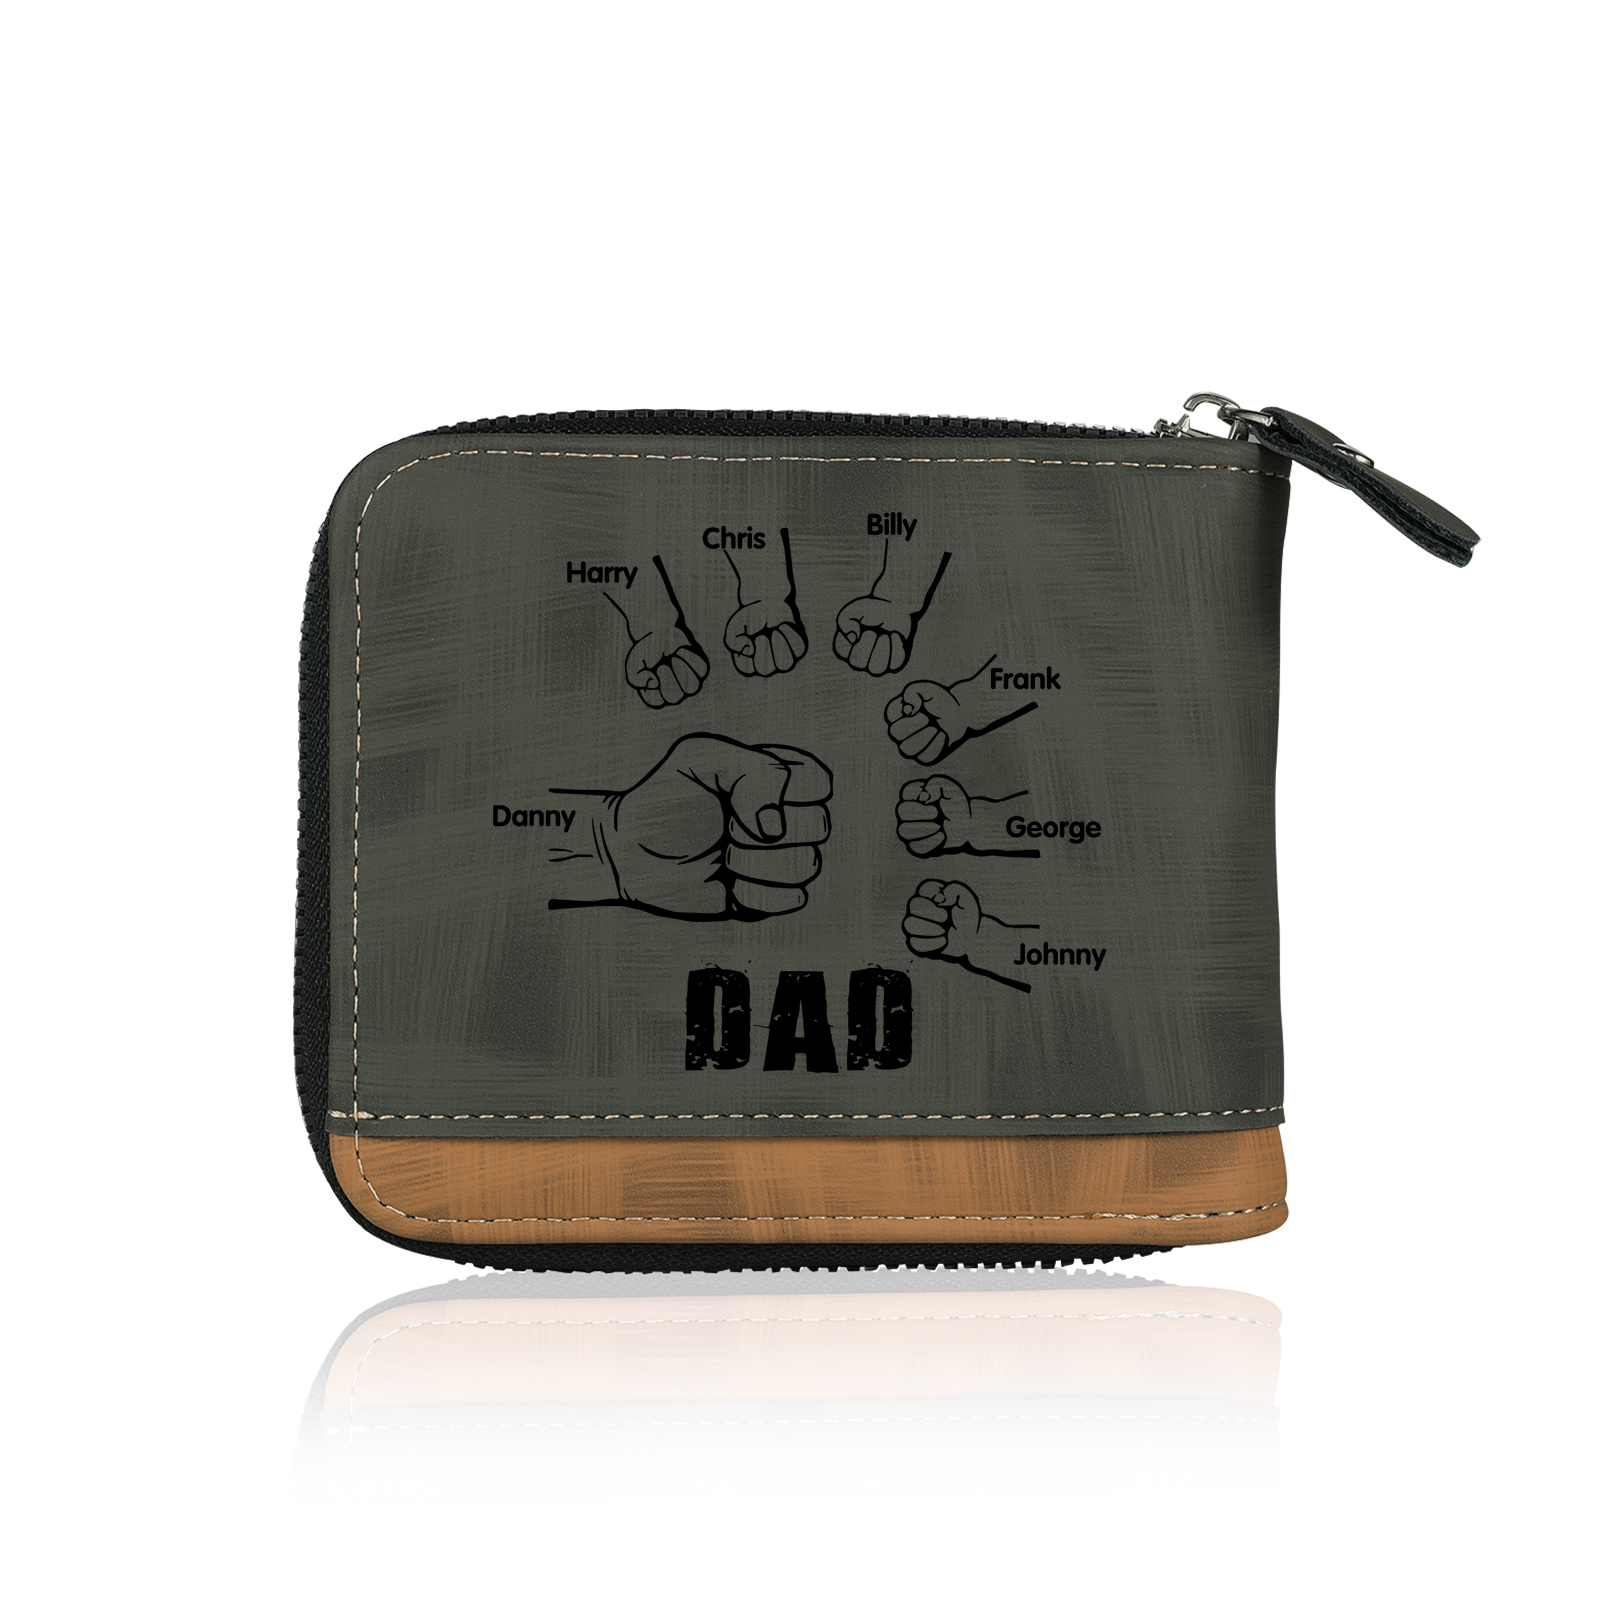 7 Names - Personalized Photo Custom Leather Men's Zipper Wallet as a Father's Day Gift for Dad